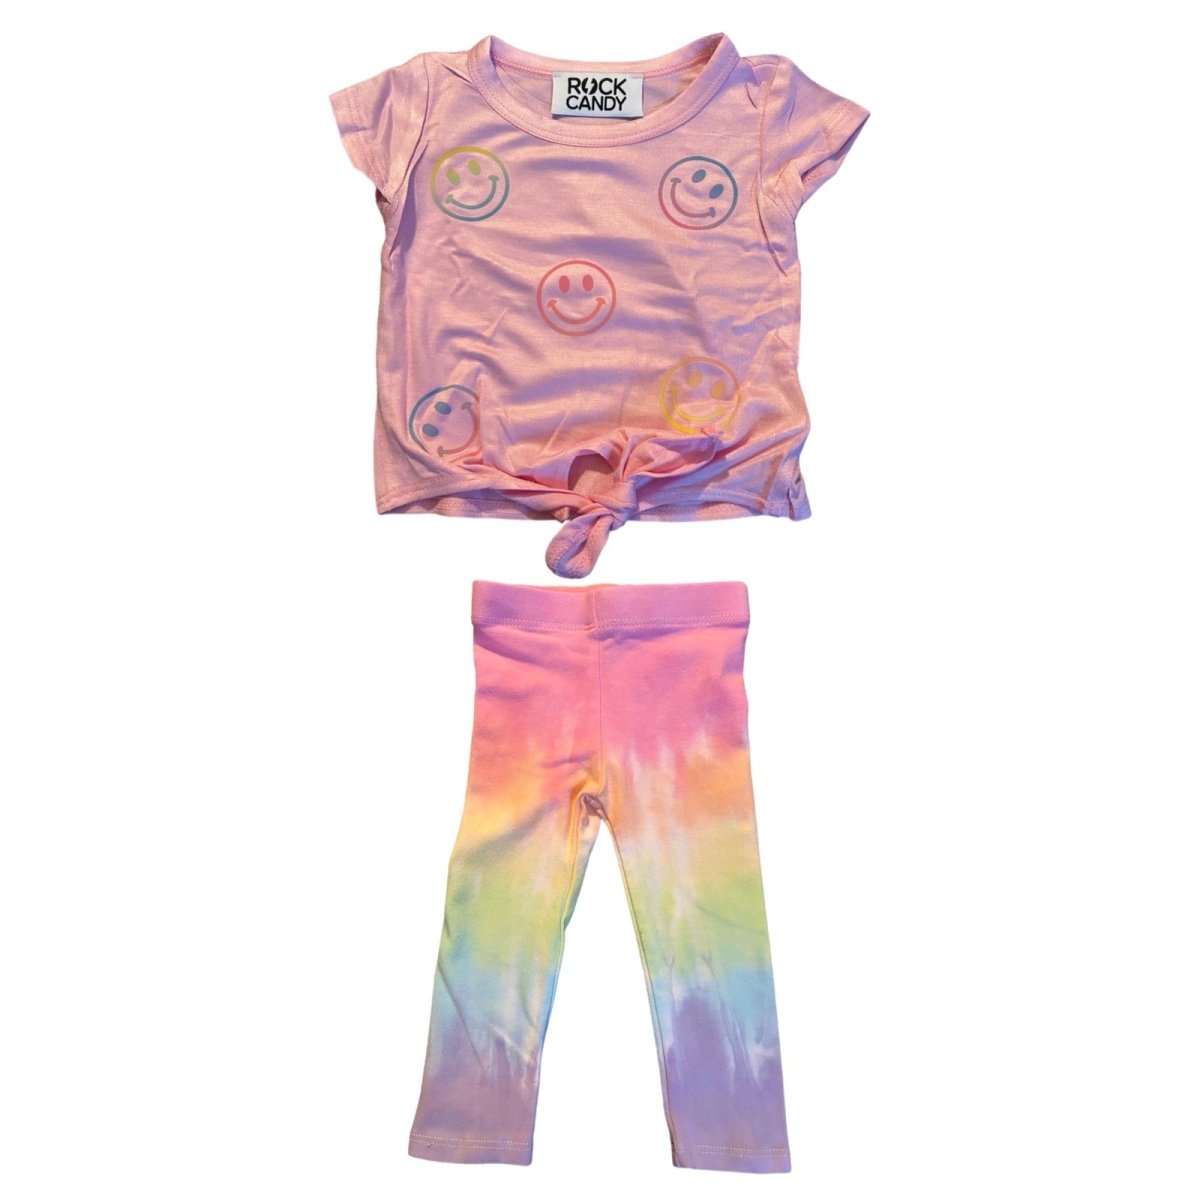 NEON SMILEY FACE TSHIRT AND TIE DYE LEGGINGS SET (PREORDER) - ROCK CANDY